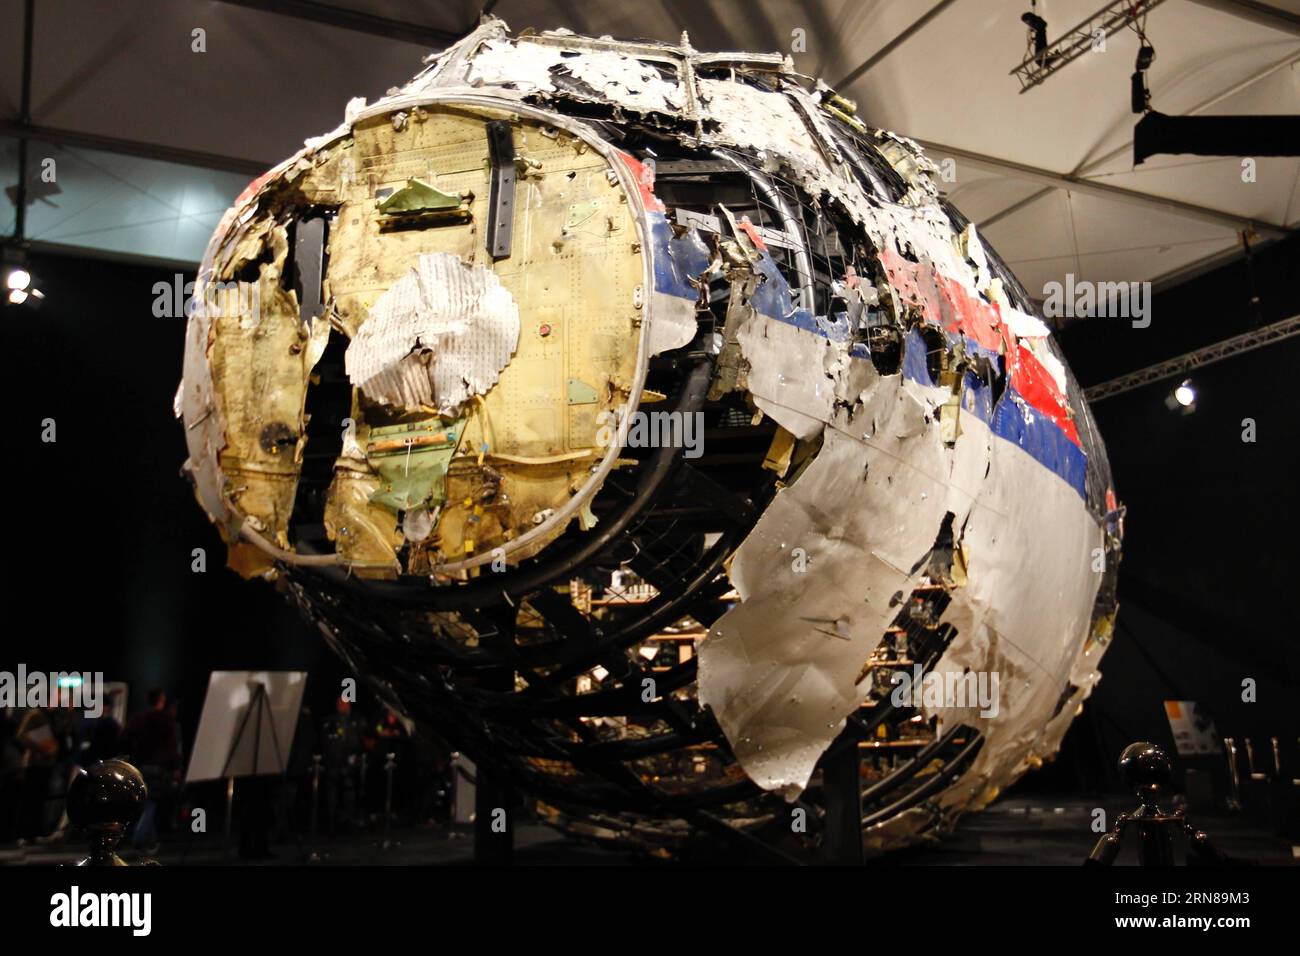 AKTUELLES ZEITGESCHEHEN Flugzeugunglück MH17: Niederländer präsentieren Abschlussbericht 151013 -- GILZE-RIJEN AIR BASE THE NETHERLANDS, Oct. 13, 2015 -- Wreckage of flight MH17 is seen after the presentation of the investigation report on the cause of its crash, at the Gilze-Rijen air base, the Netherlands, on Oct. 13, 2015. The crash of flight MH17 on 17 July last year was caused by the detonation of a 9N314M-type warhead launched from eastern Ukraine using a Buk missile system, said the investigation report published Tuesday by the Dutch Safety Board DSB.  NETHERLANDS-MH17-REPORT SylviaxLed Stock Photo